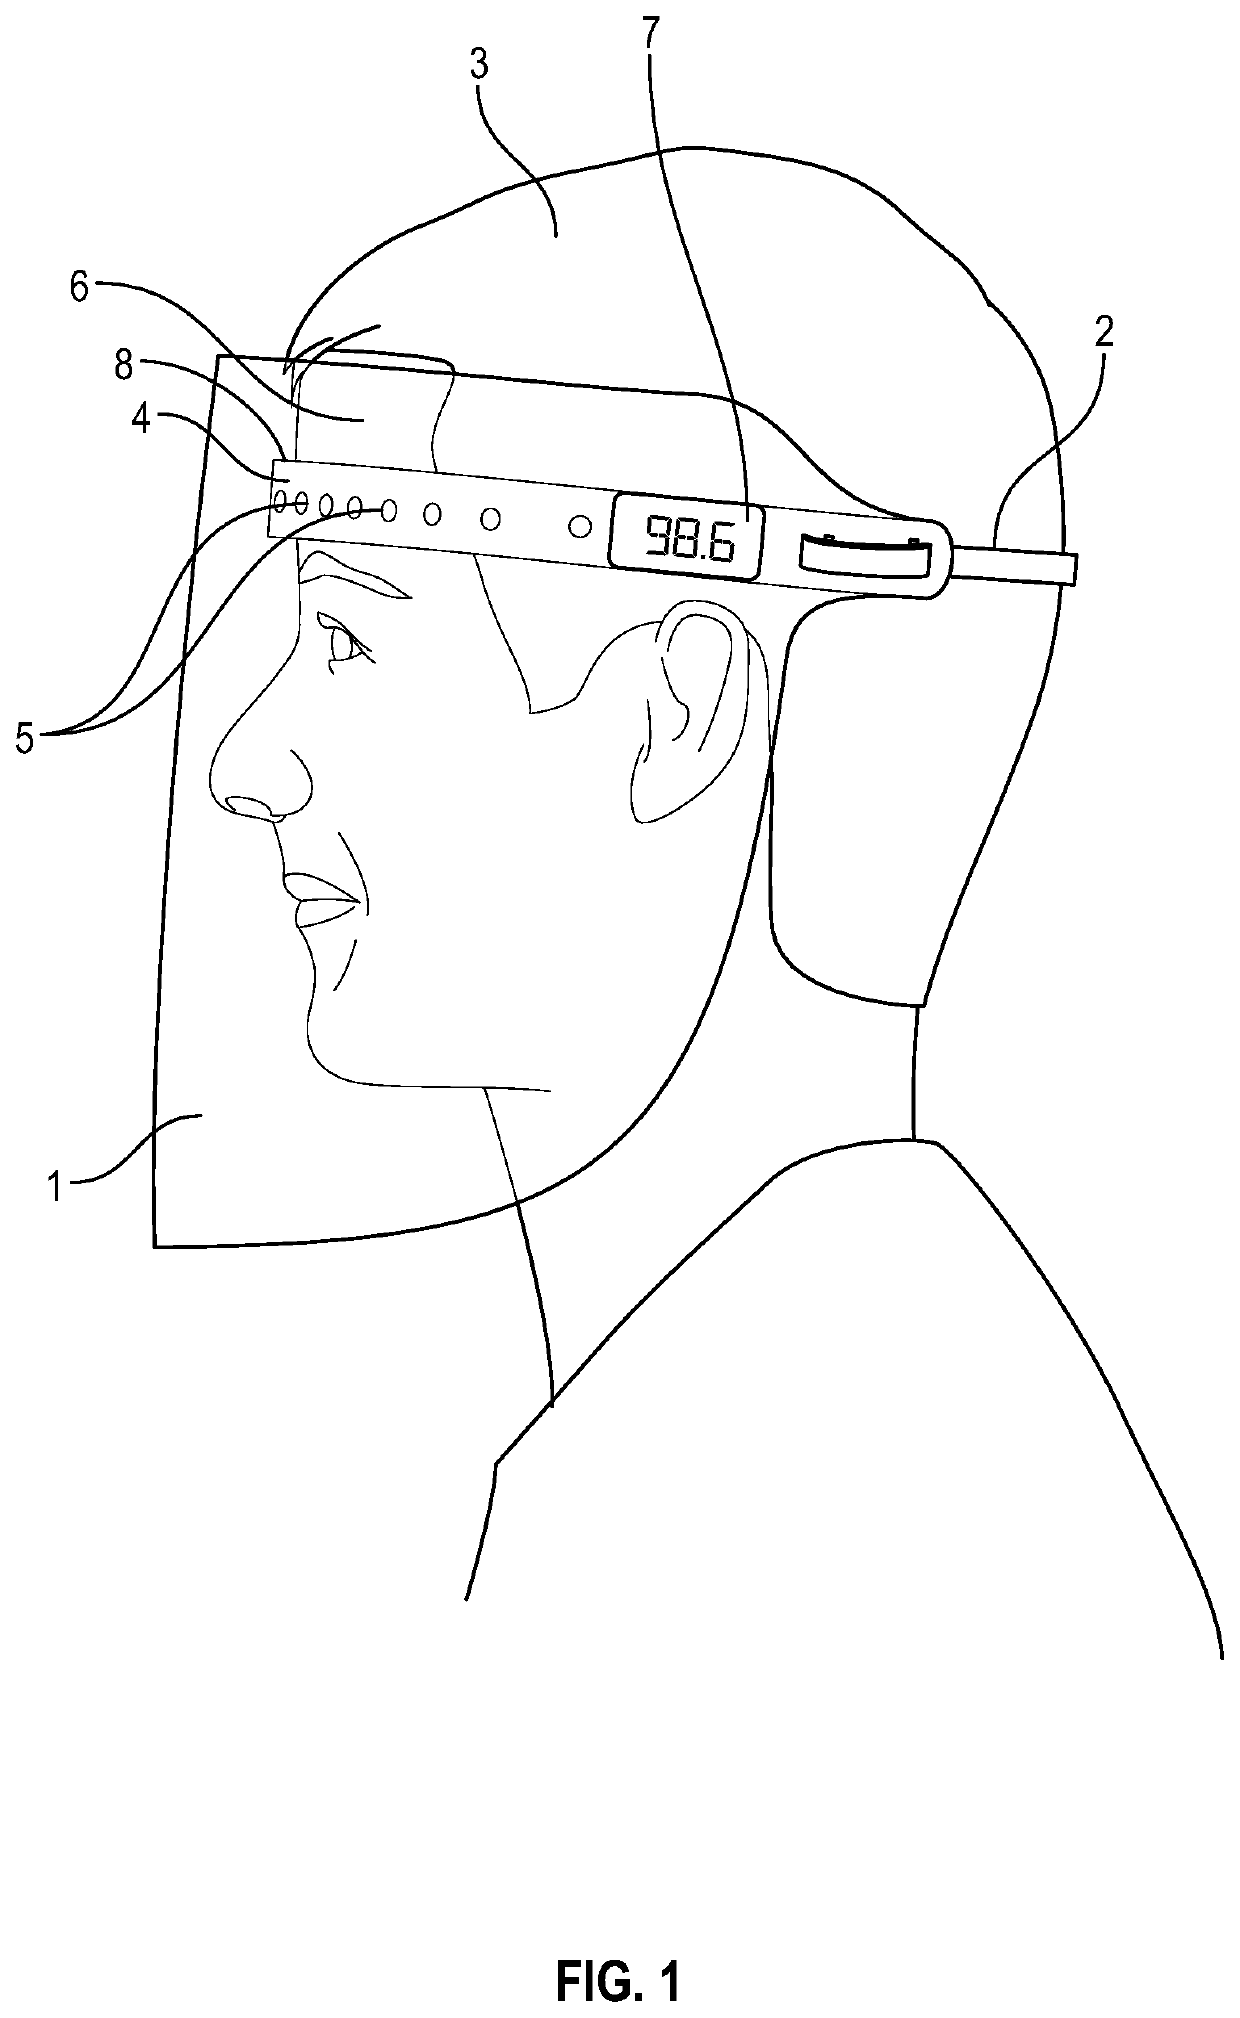 Protective temperature-sensing face shield with temperature display